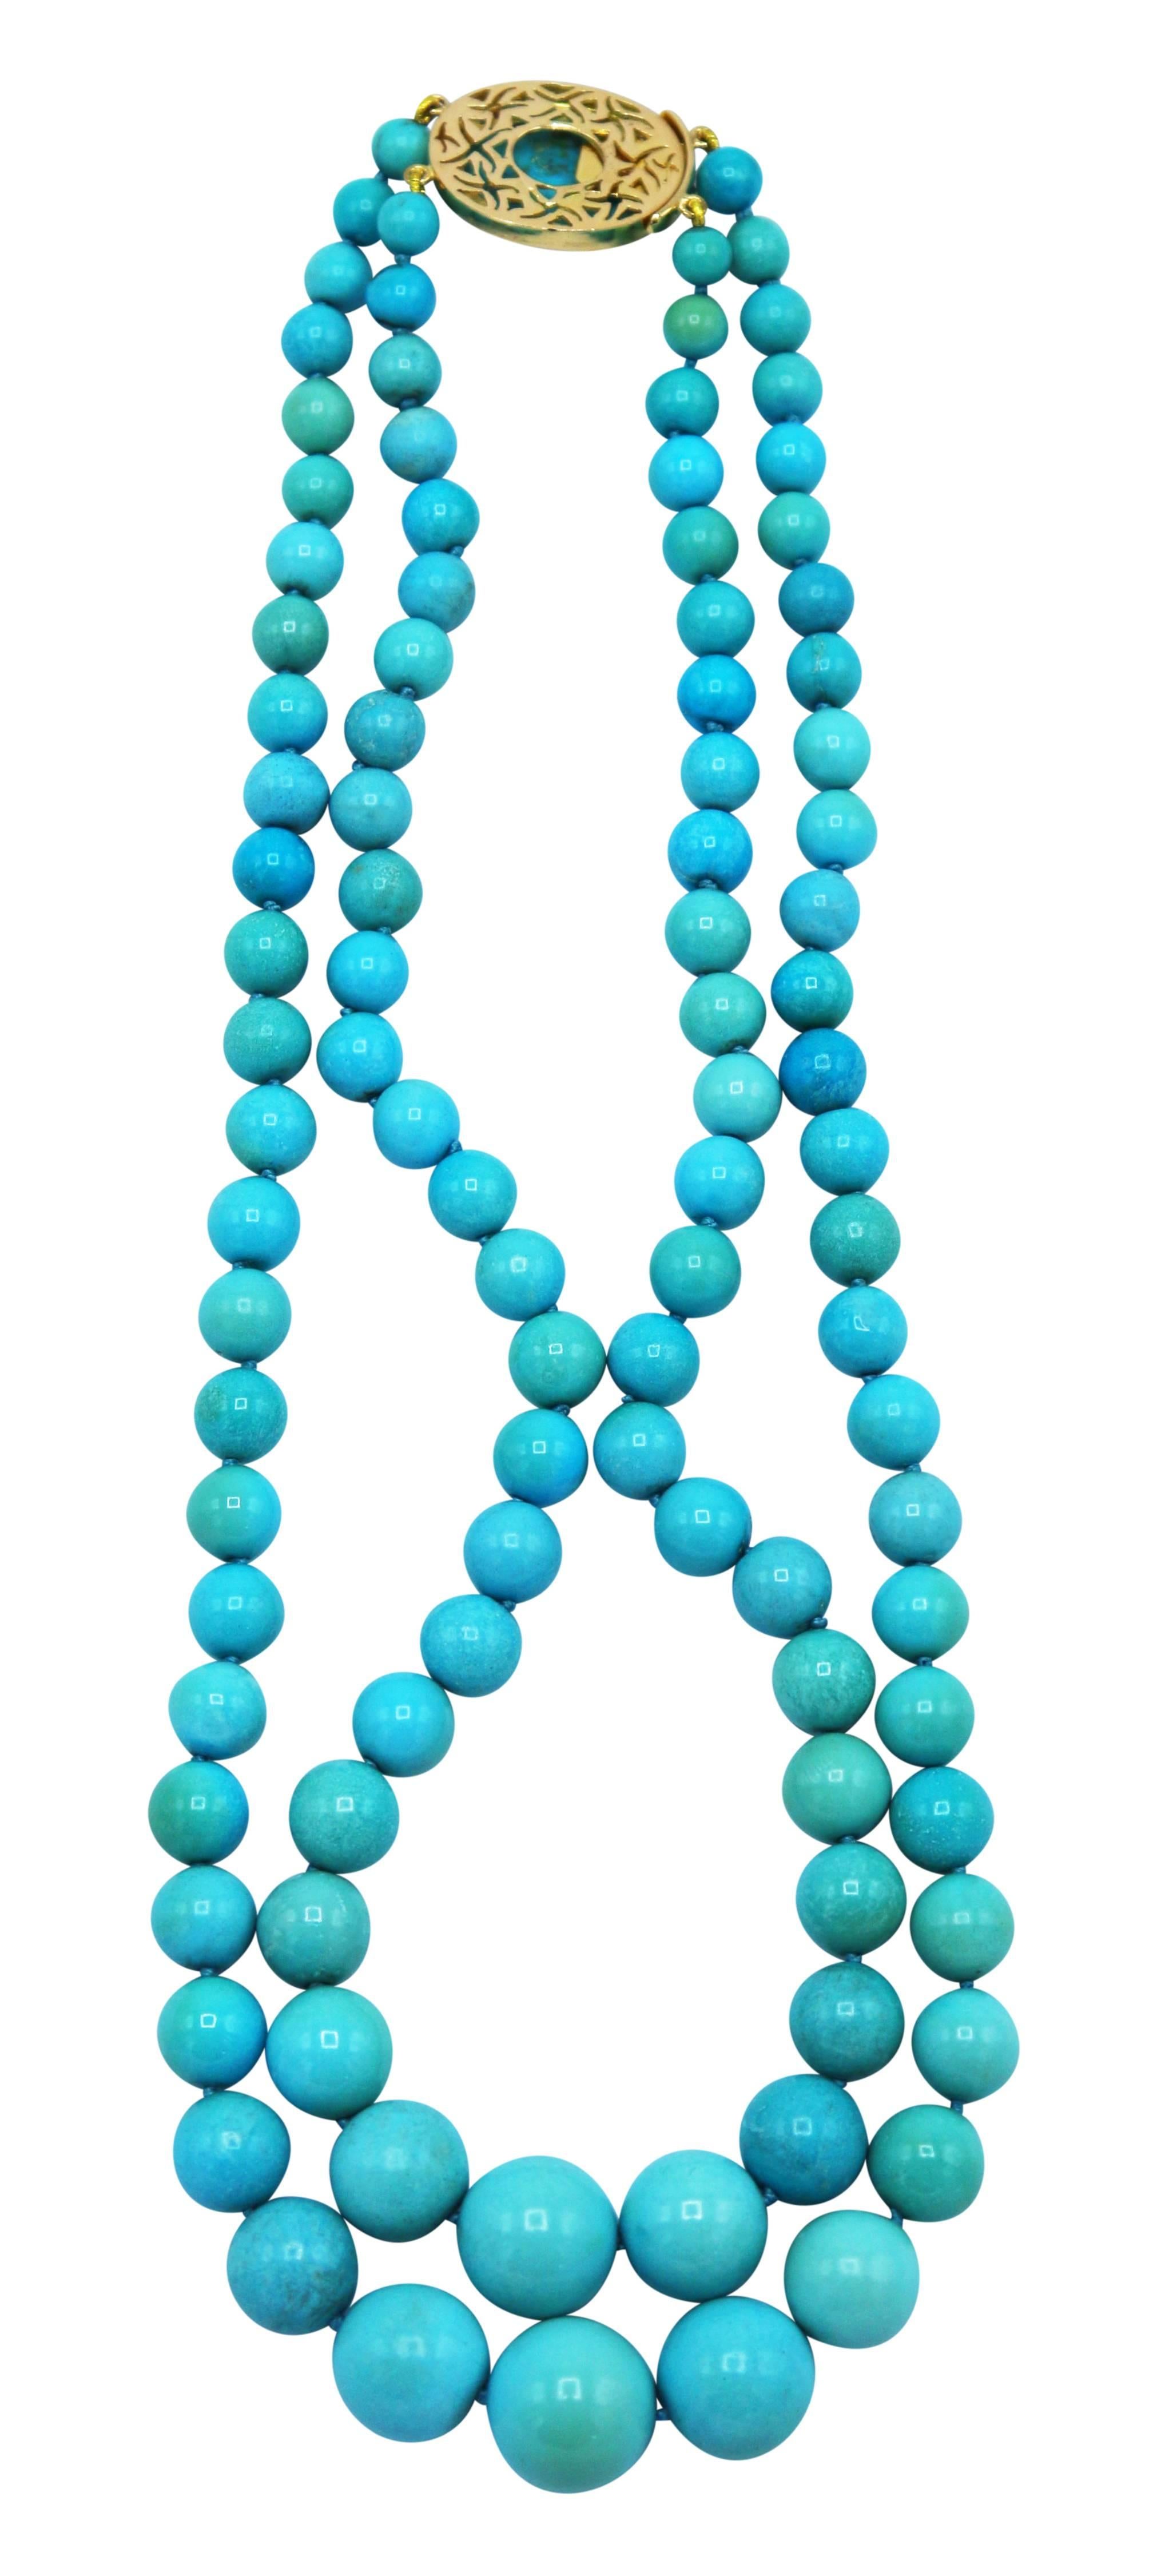 Lovely 18 karat yellow gold and natural turquoise necklace, circa 1970, designed as two graduated strands of numerous natural turquoise beads measuring 15.0 to 7.0 mm., completed by an oval clasp set with a cabochon turquoise segment framed by round